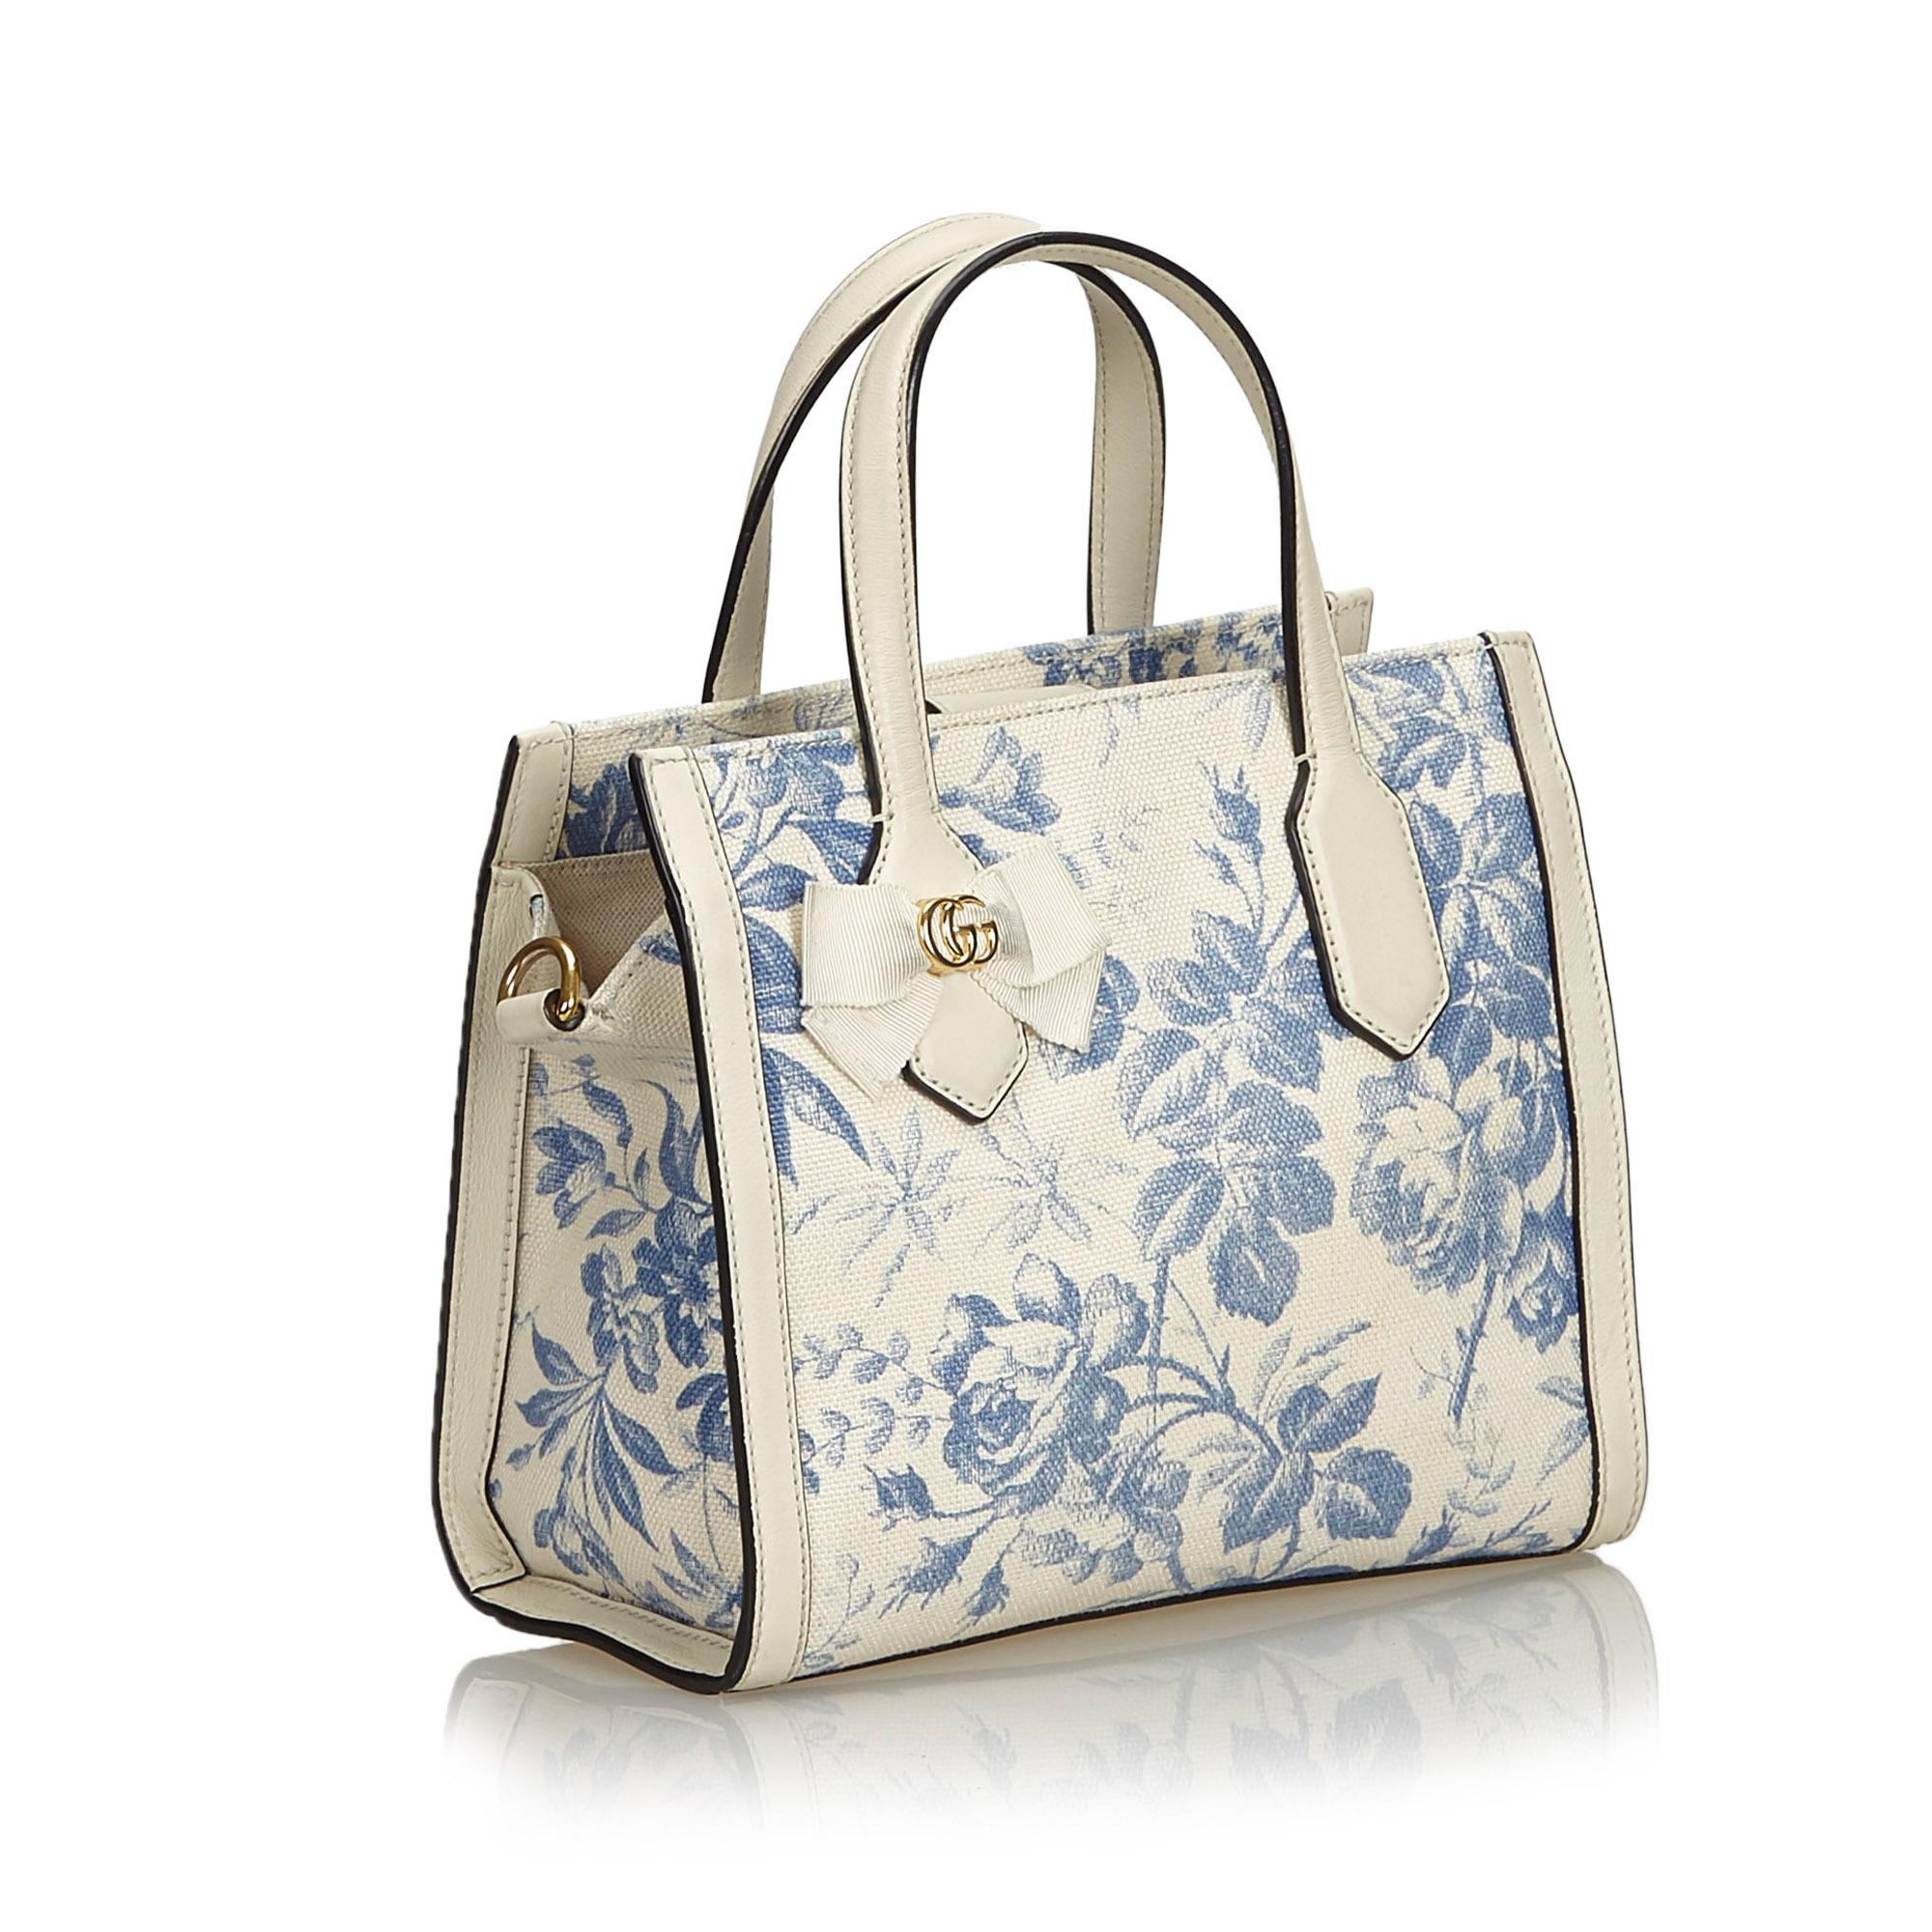 Gucci Herbarium Canvas Tote Bag

This satchel features a floral canvas body with leather trim, flat leather handles, a flat shoulder strap, an open top with a magnetic closure, and interior slip pockets. 

Approx. 

Length: 20 cm. 
Width: 23.5 cm.